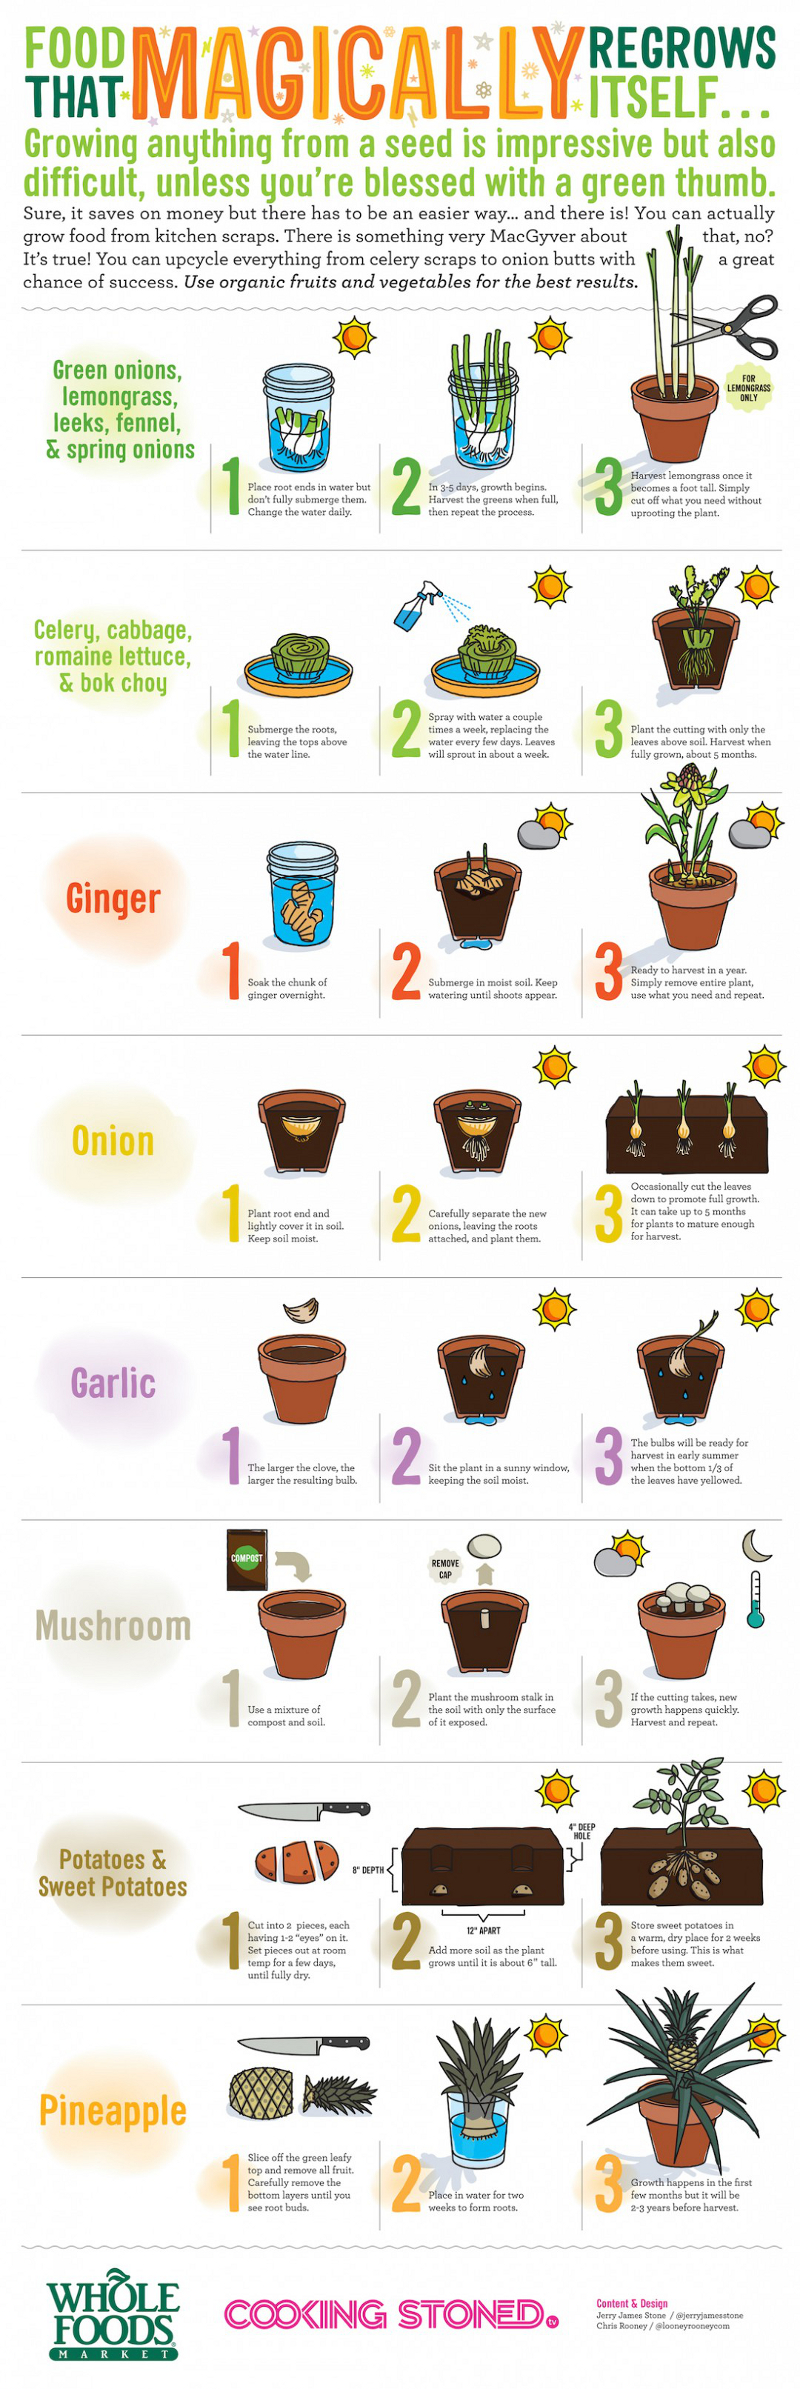 Food-That-Regrow-From-Scraps